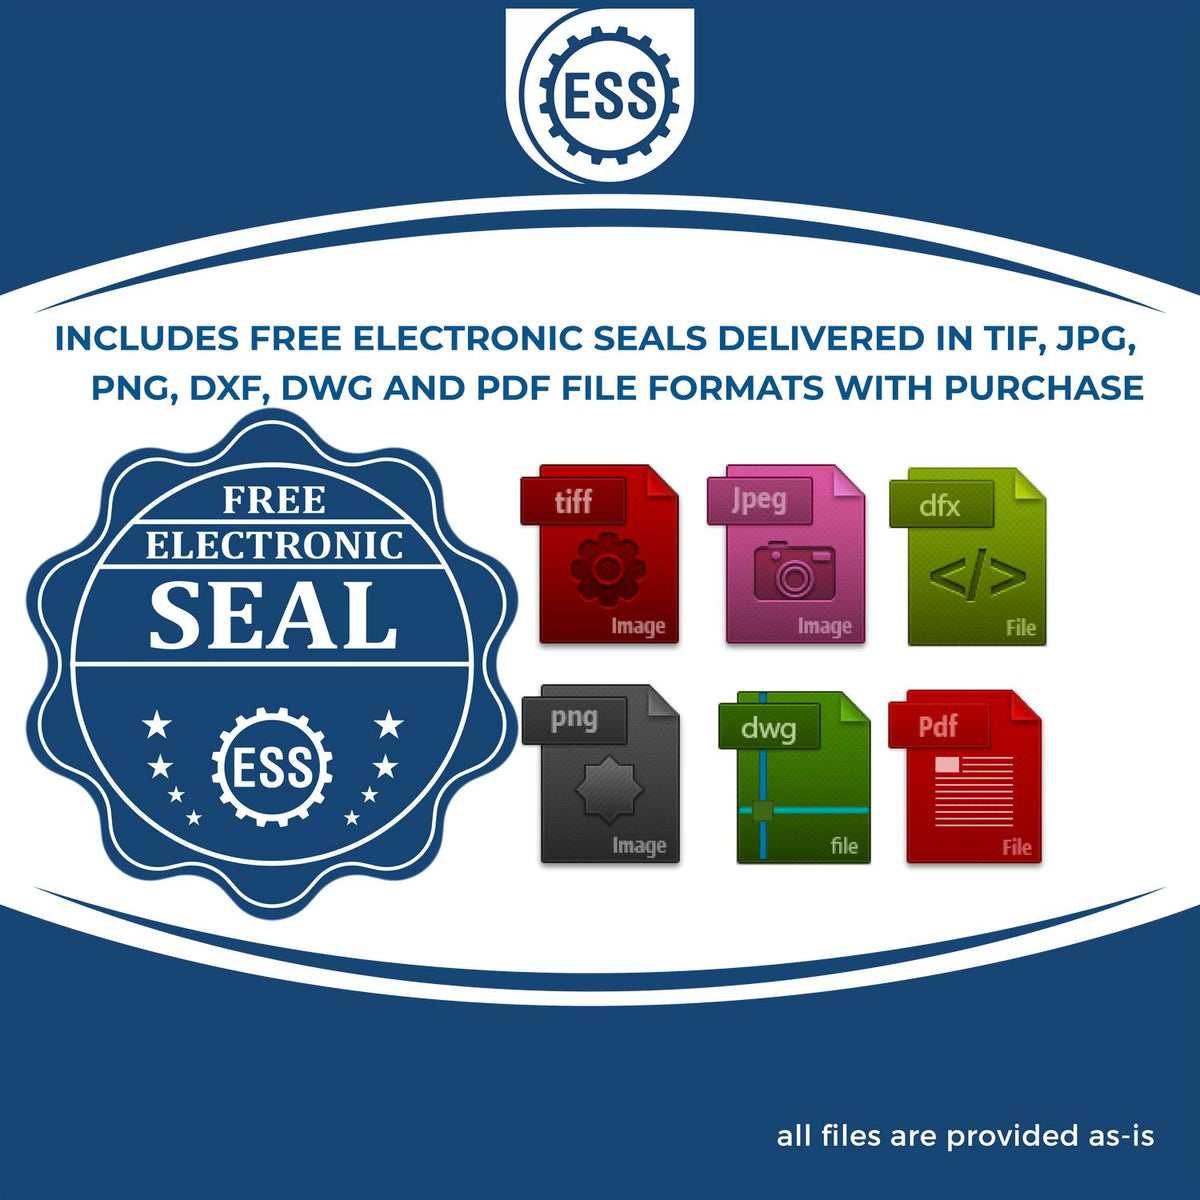 An infographic for the free electronic seal for the Premium MaxLight Pre-Inked Washington Landscape Architectural Stamp illustrating the different file type icons such as DXF, DWG, TIF, JPG and PNG.